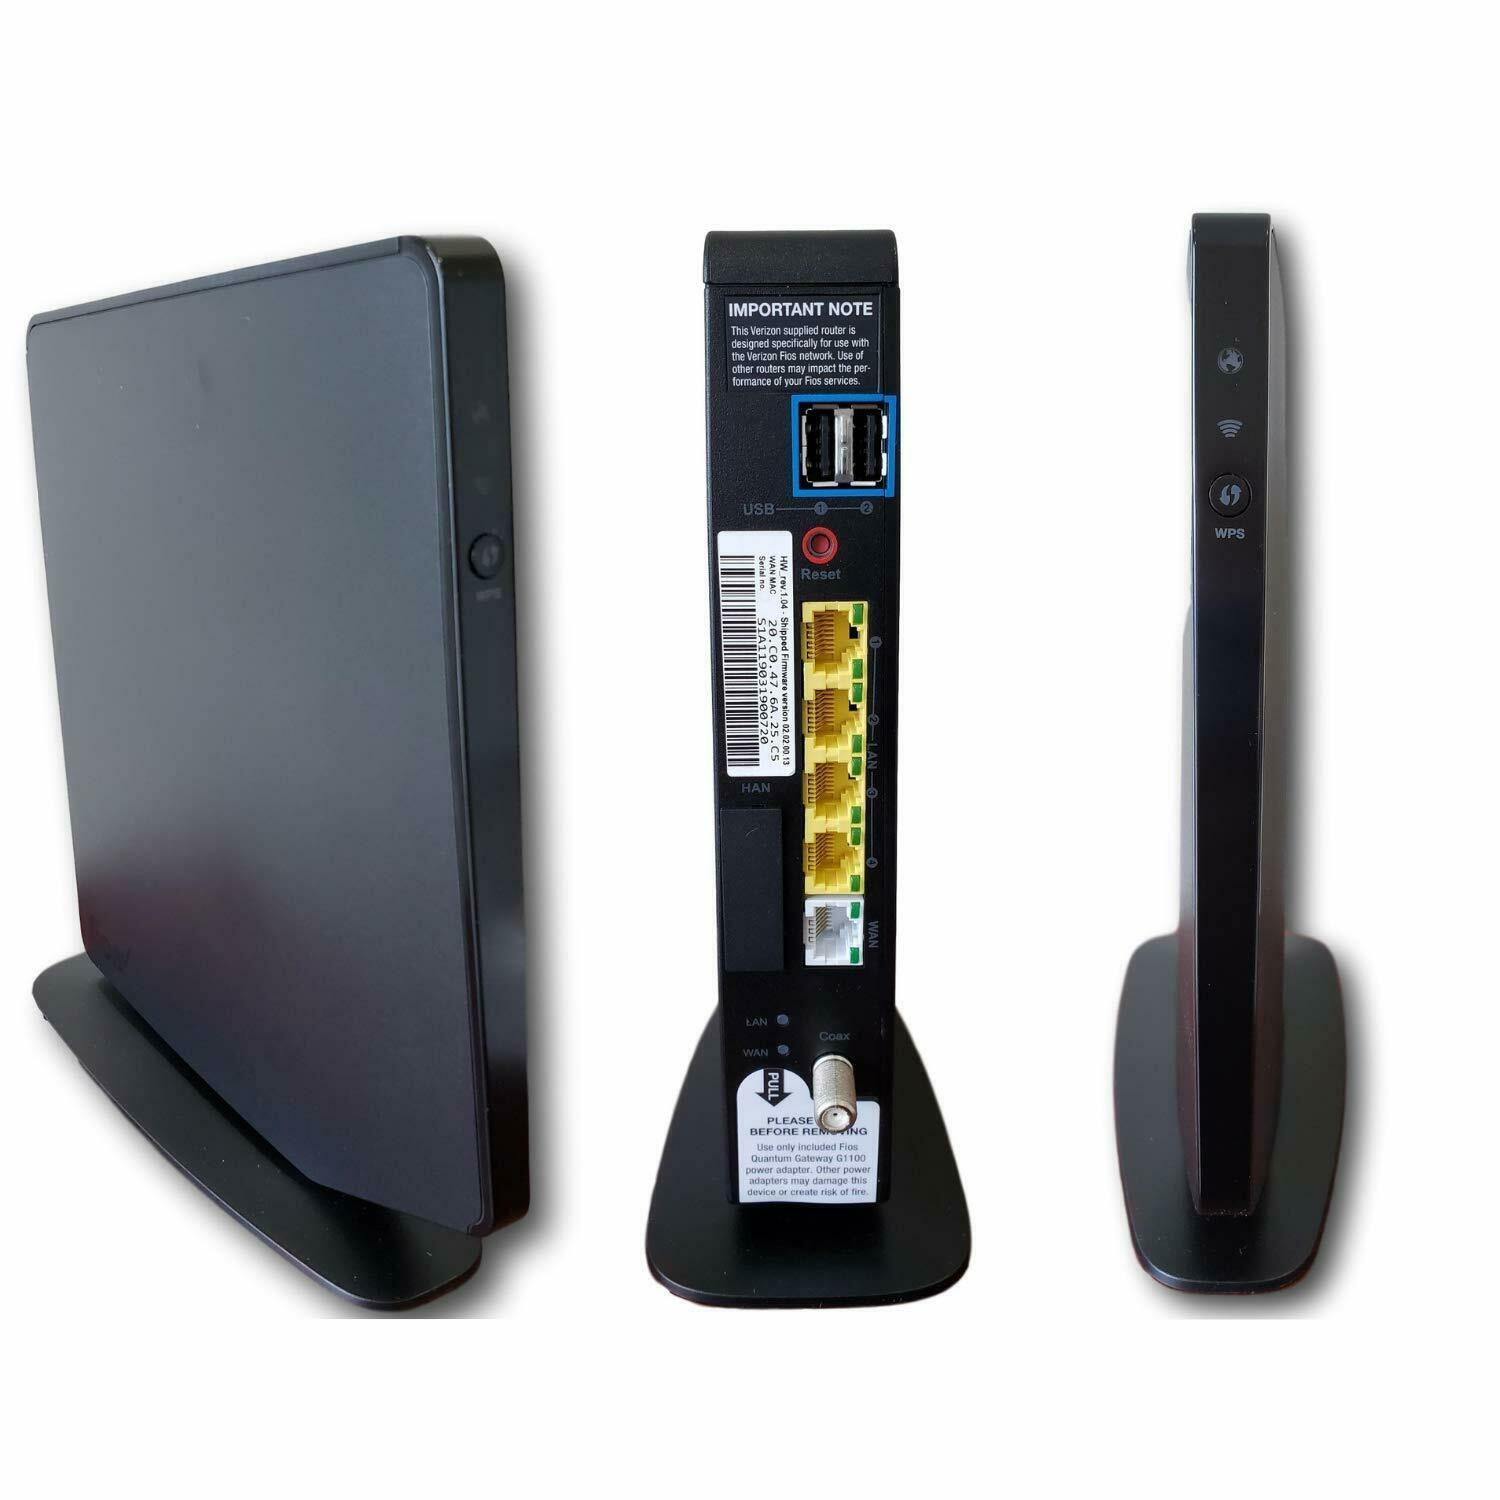 verizon fios modem and router combo